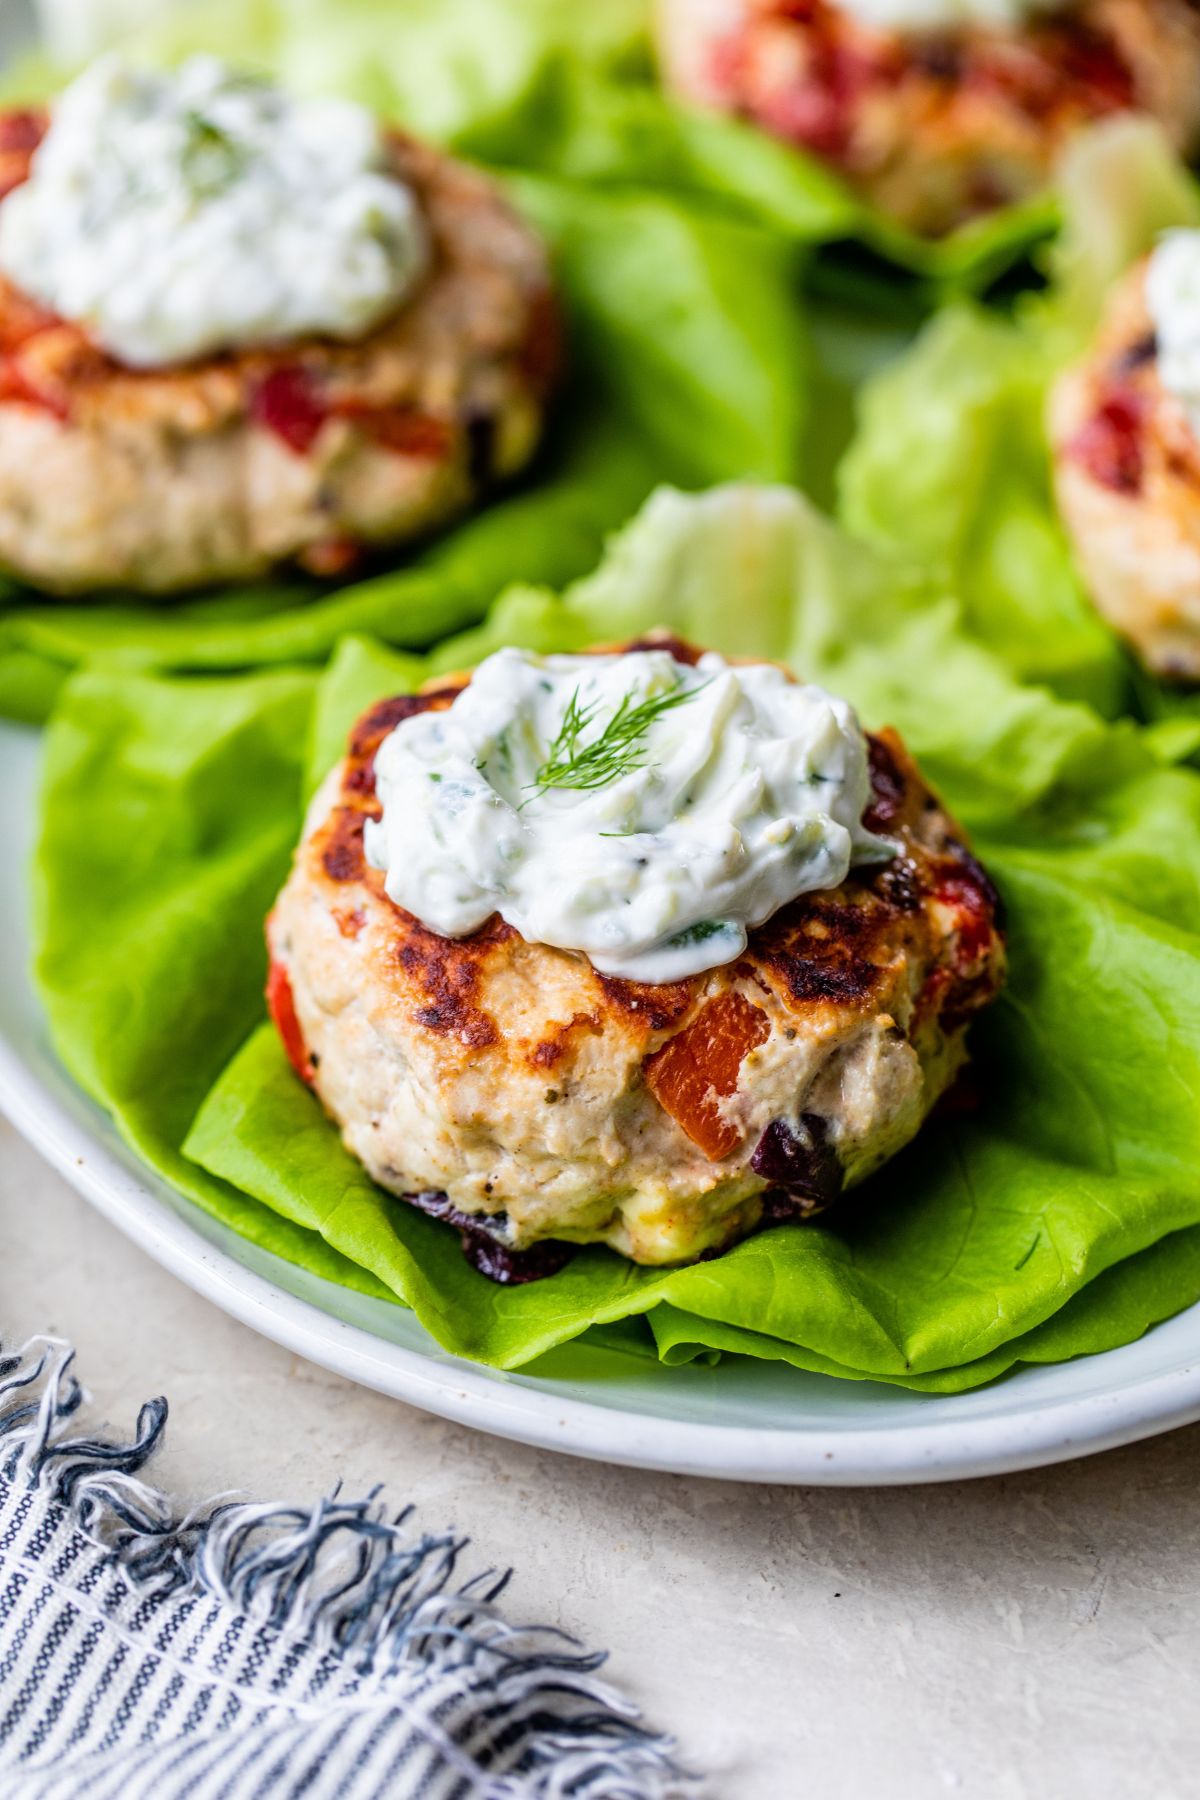 Greek Turkey Burgers served on lettuce and topped with Tzatziki sauce.